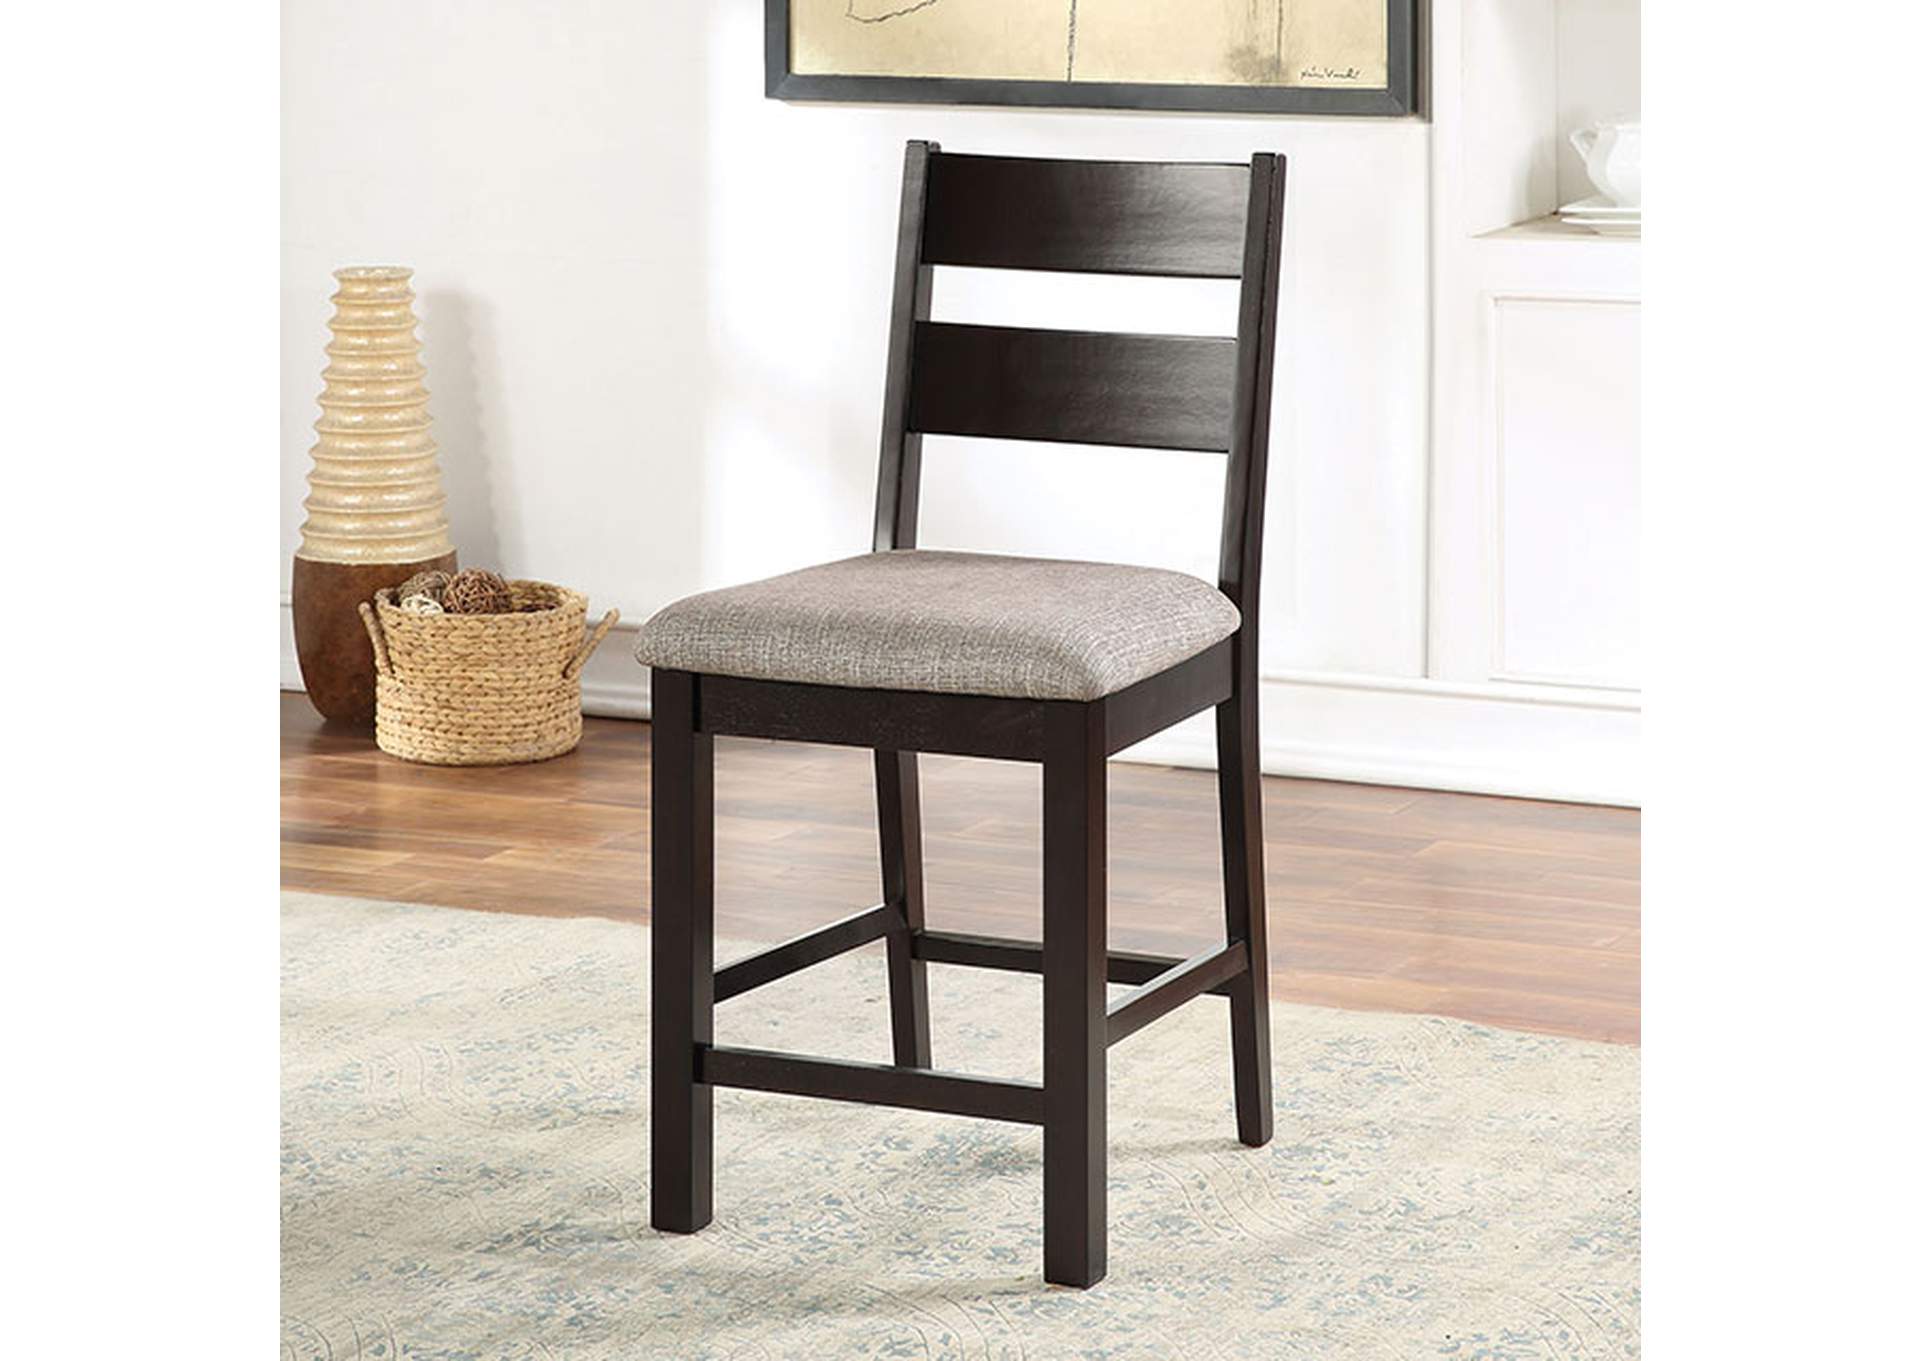 Valdor Counter Ht. Chair,Furniture of America